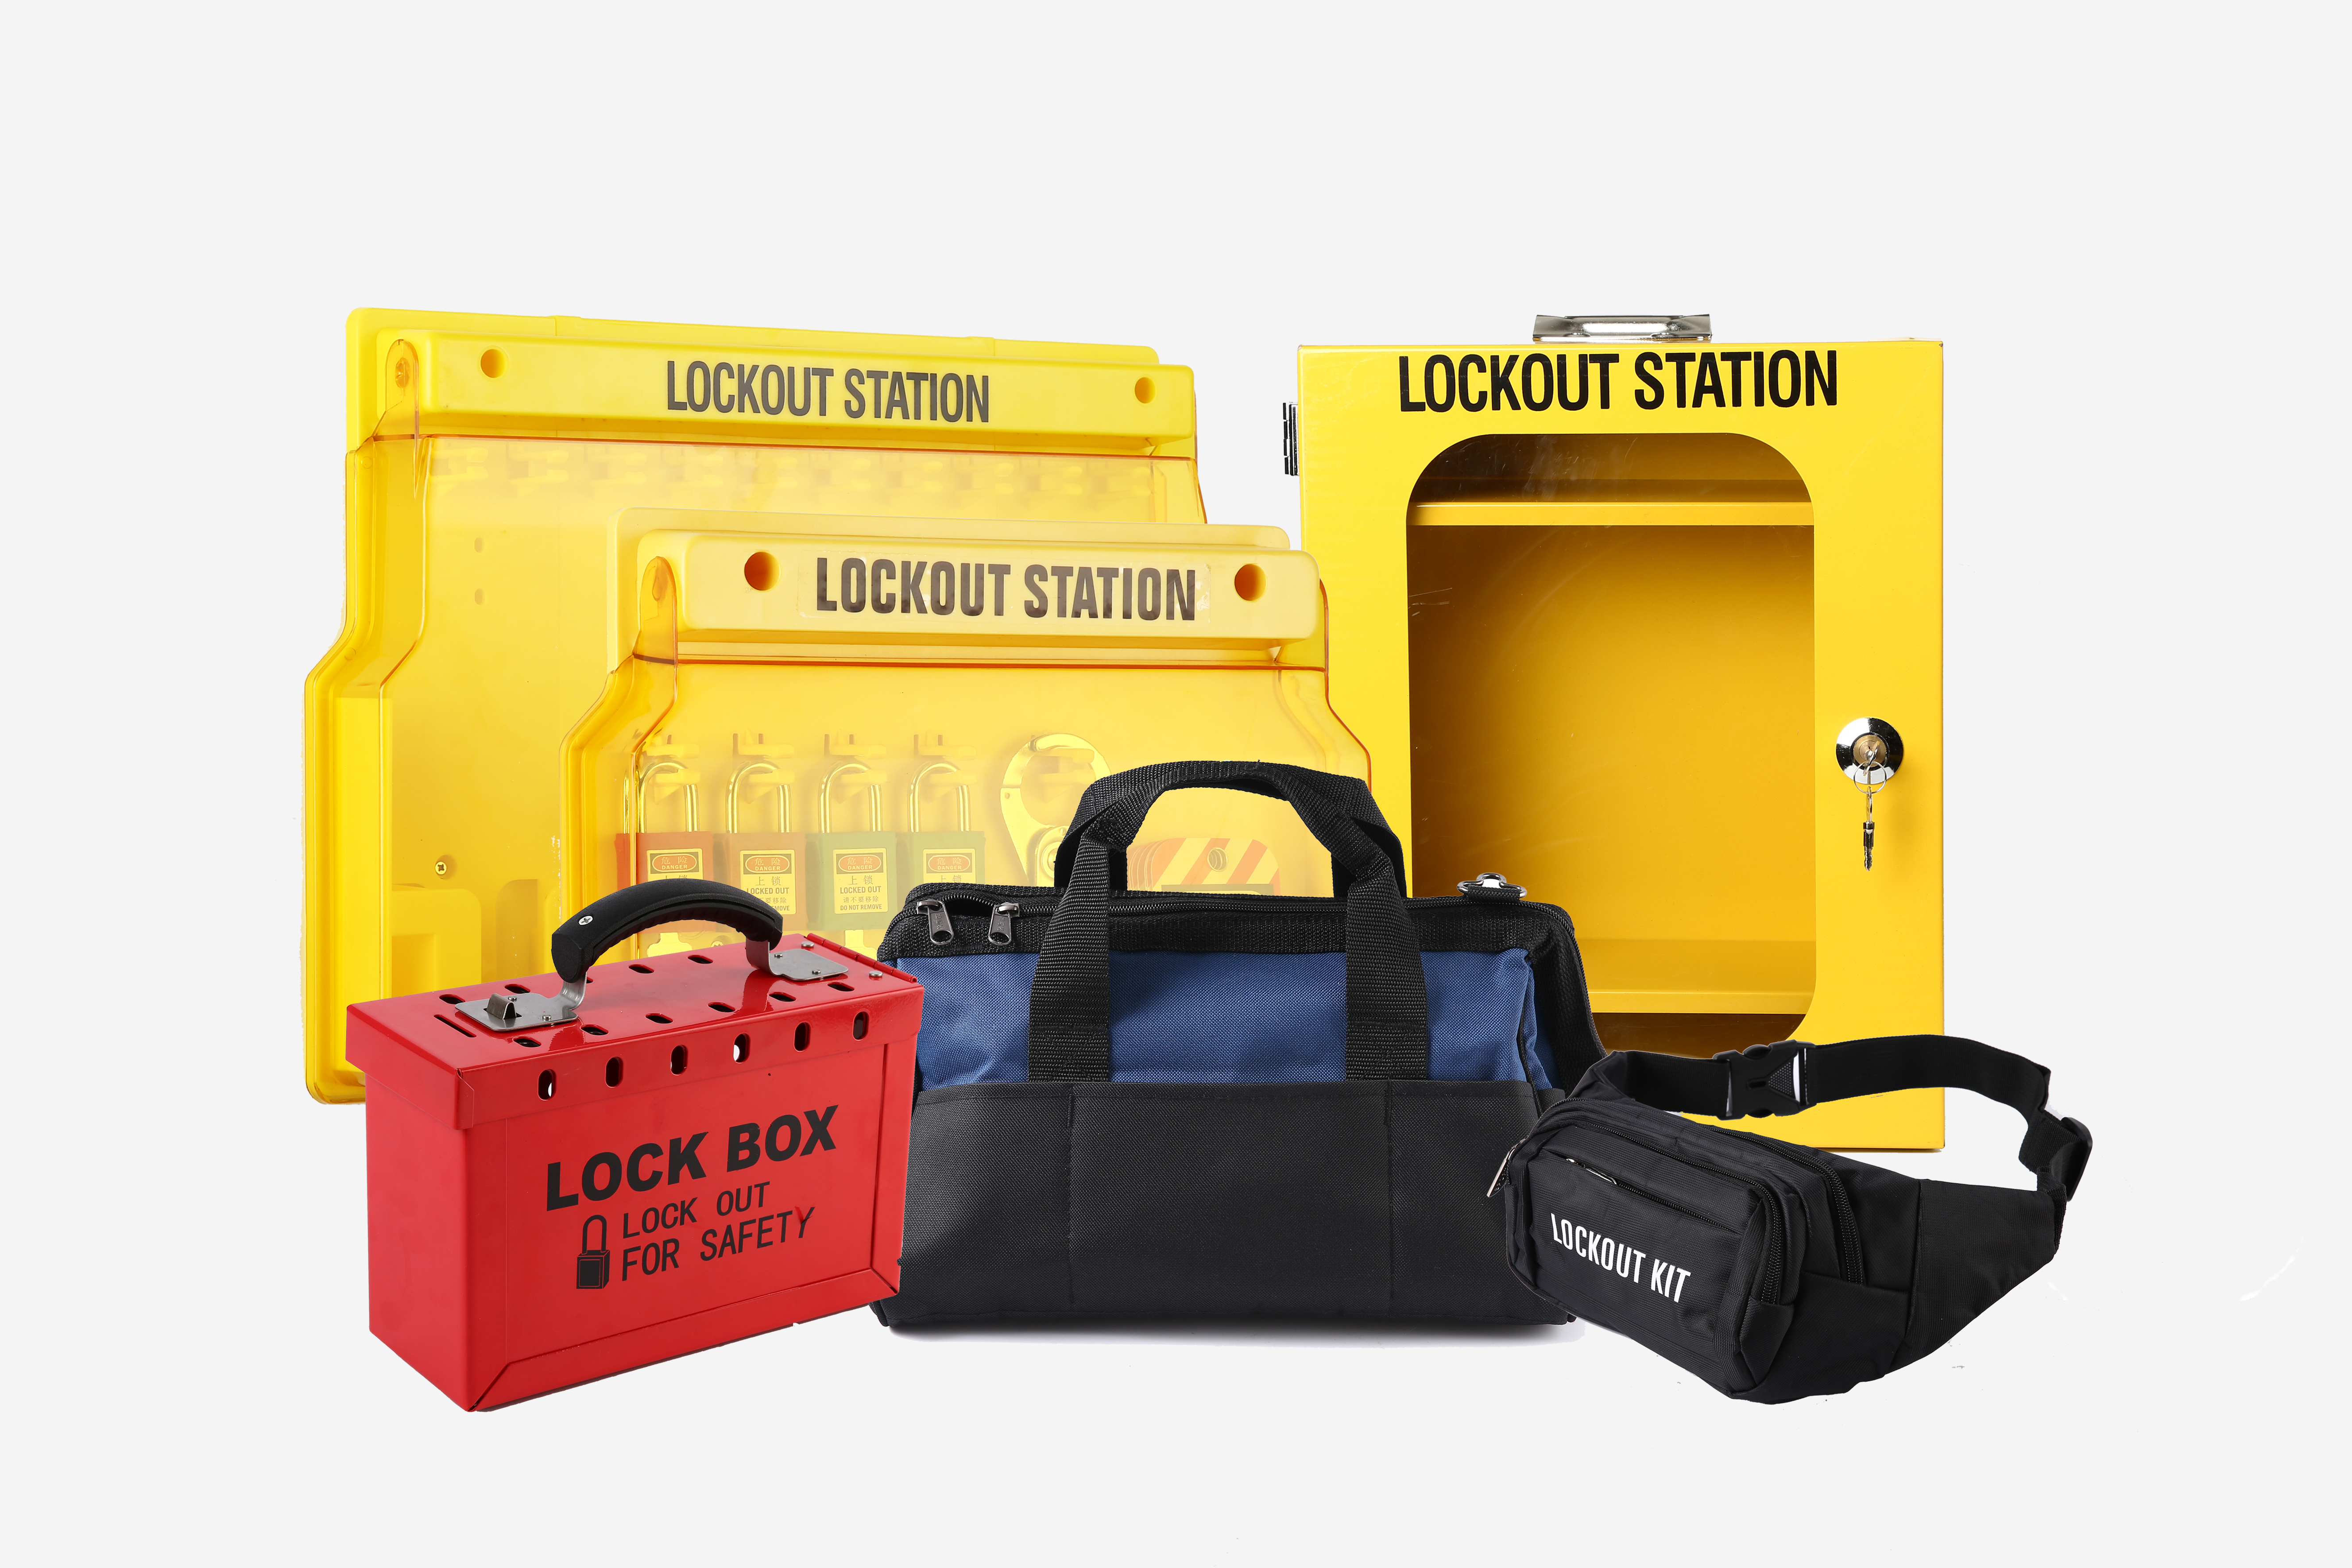 What are the requirements for lockout and tag-out manufacturers to meet?